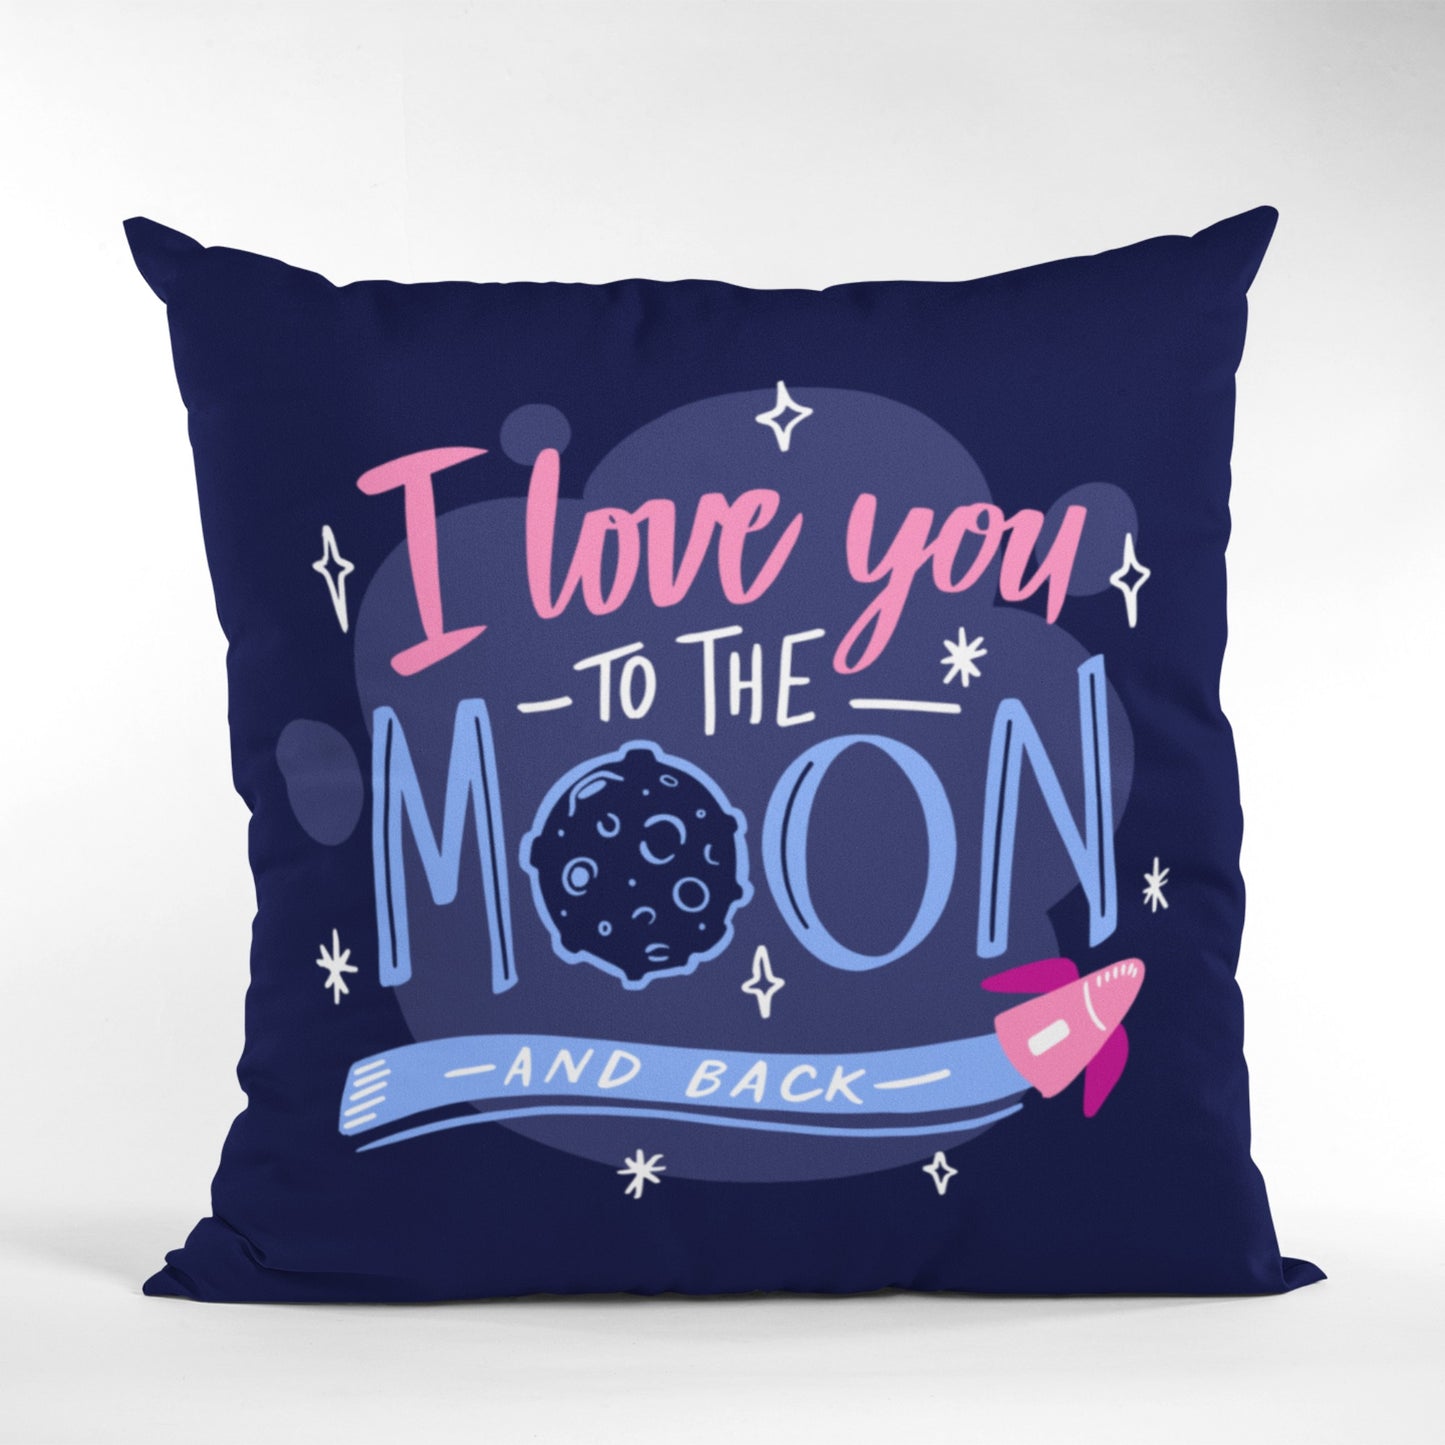 "I Love You to the Moon" Pillow